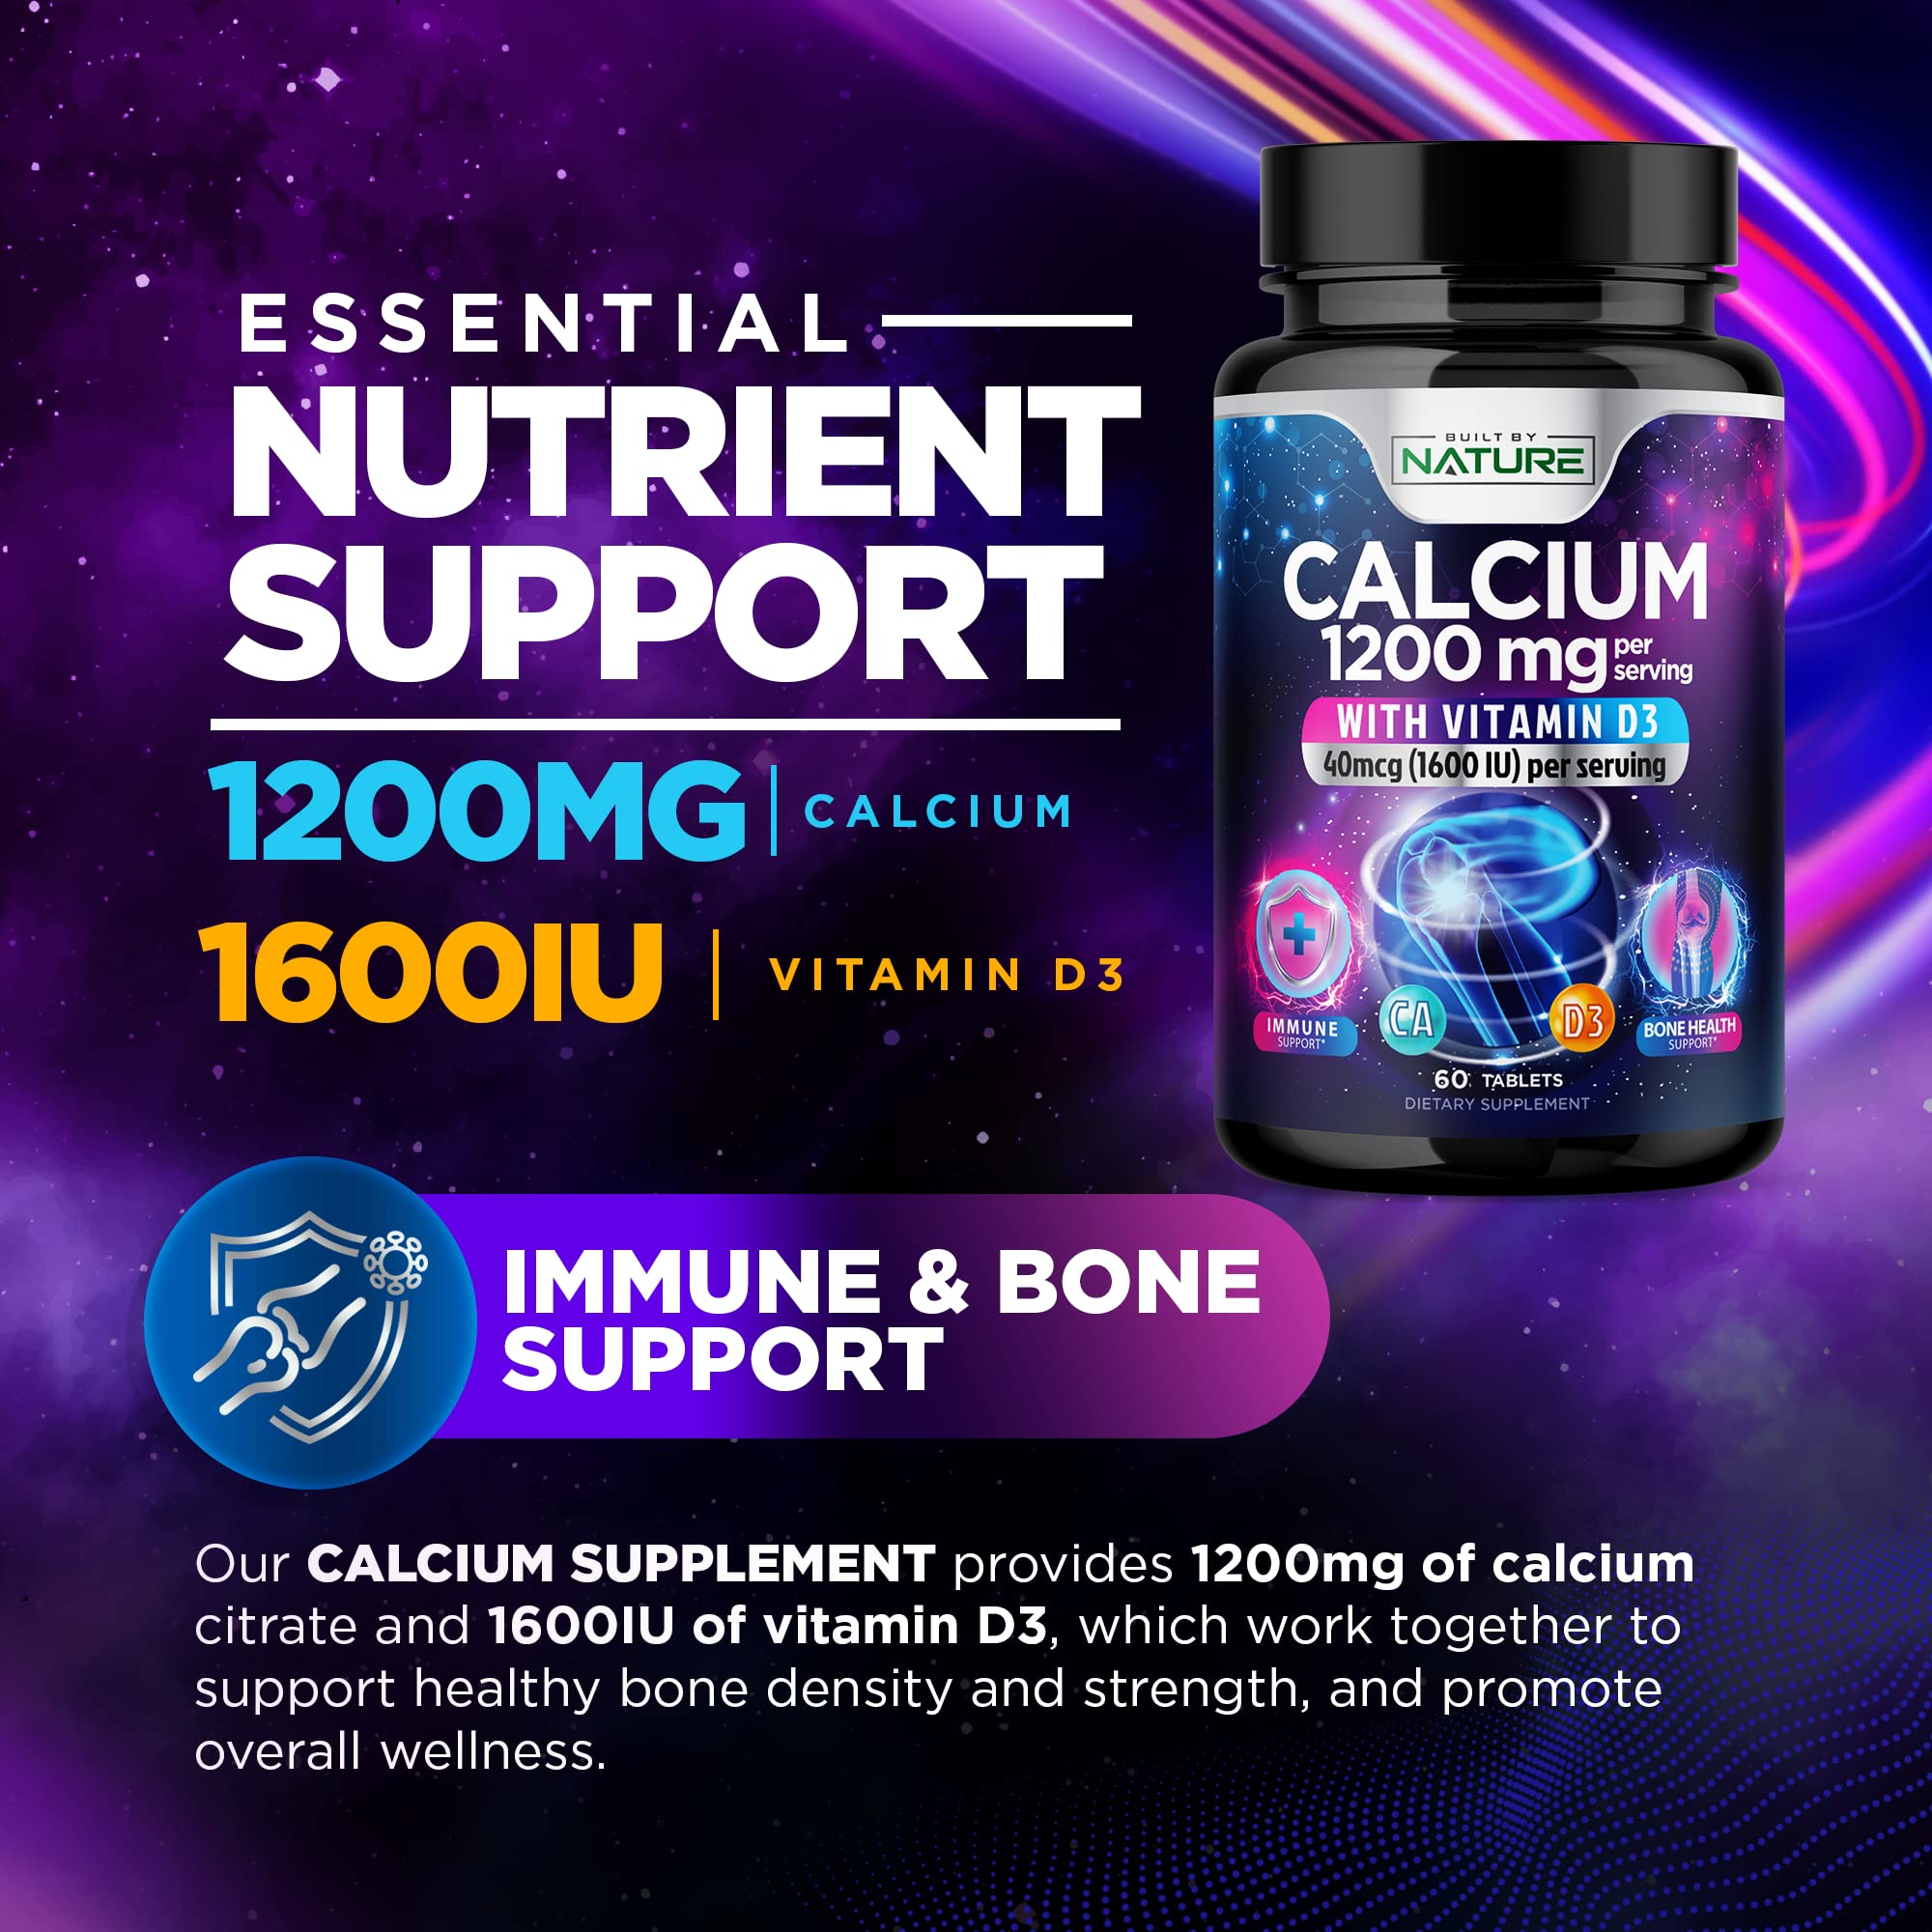 Calcium 1200mg with Vitamin D3 for Best Absorption - Advanced Bone Support Supplement, 1200 mg Calcium Carbonate & 1600 IU Vitamin D, Slow Release for Immune Support, Easy to Swallow, 120 Tablets